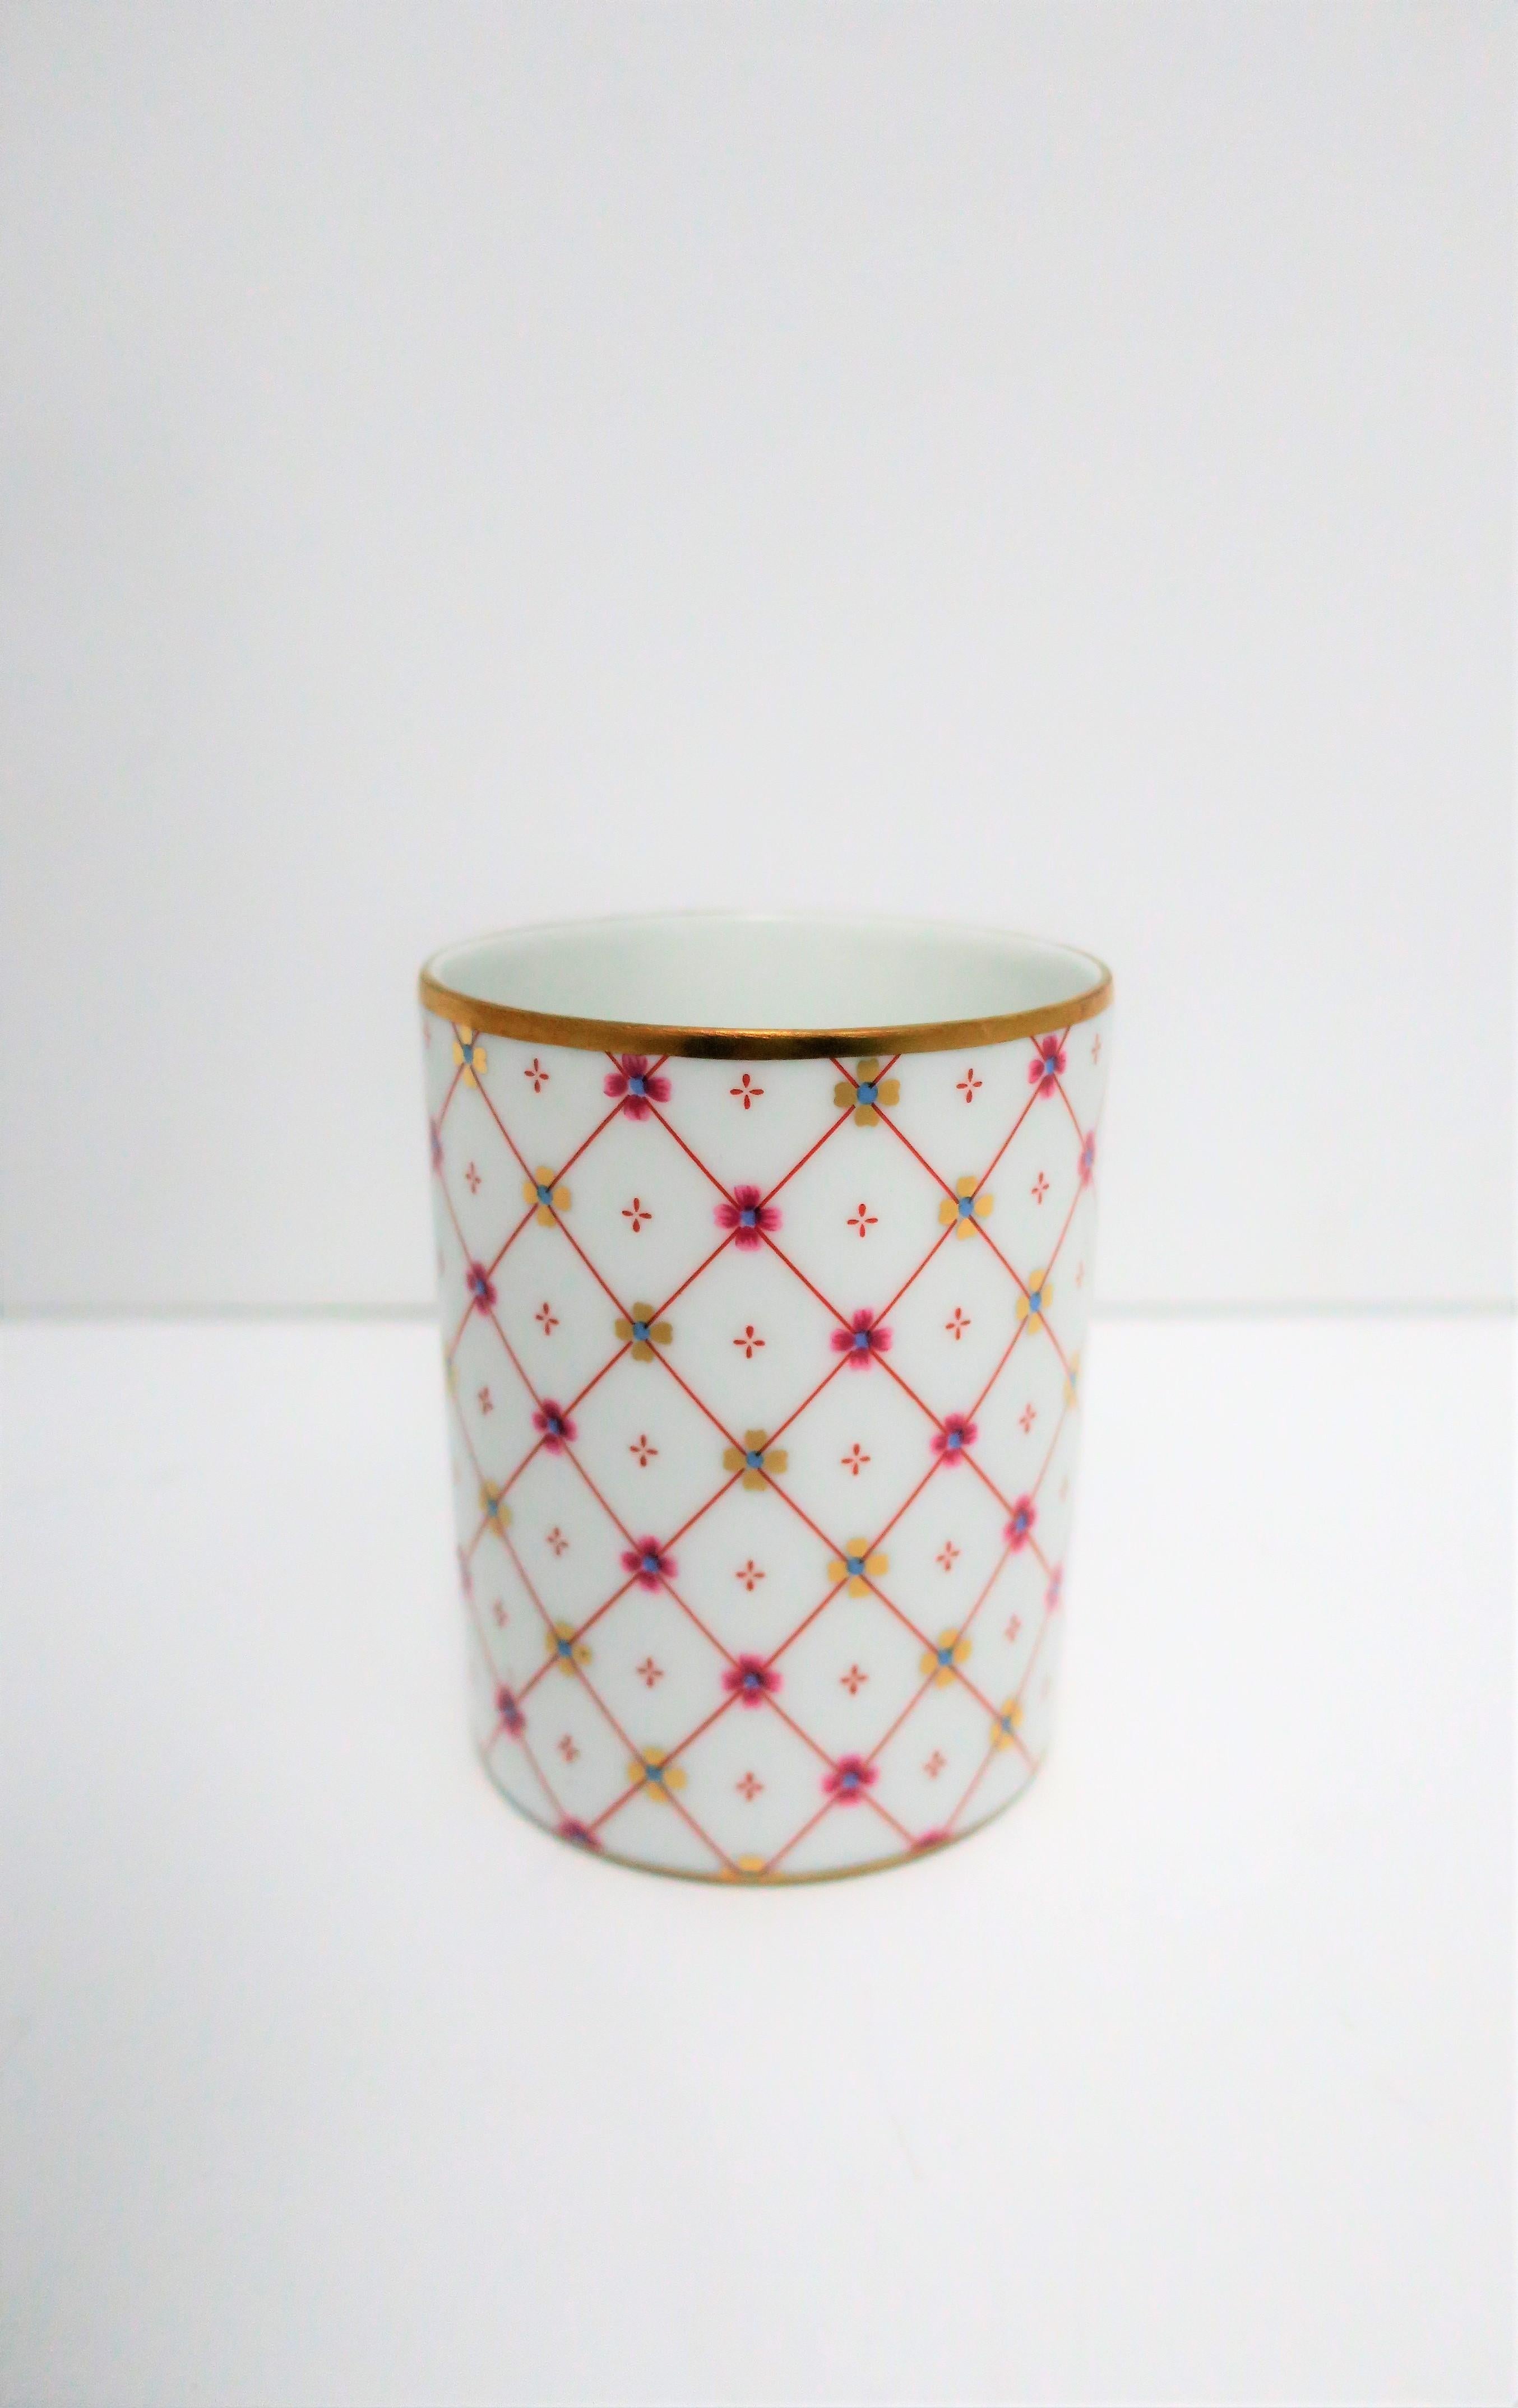 A beautiful Italian white and gold porcelain bathroom water cup or vanity piece to hold Q-tips, make-up brushes, etc., by designer Richard Ginori, circa 20th century, Italy. Piece could also be used as a small vase. Colors include: White porcelain,